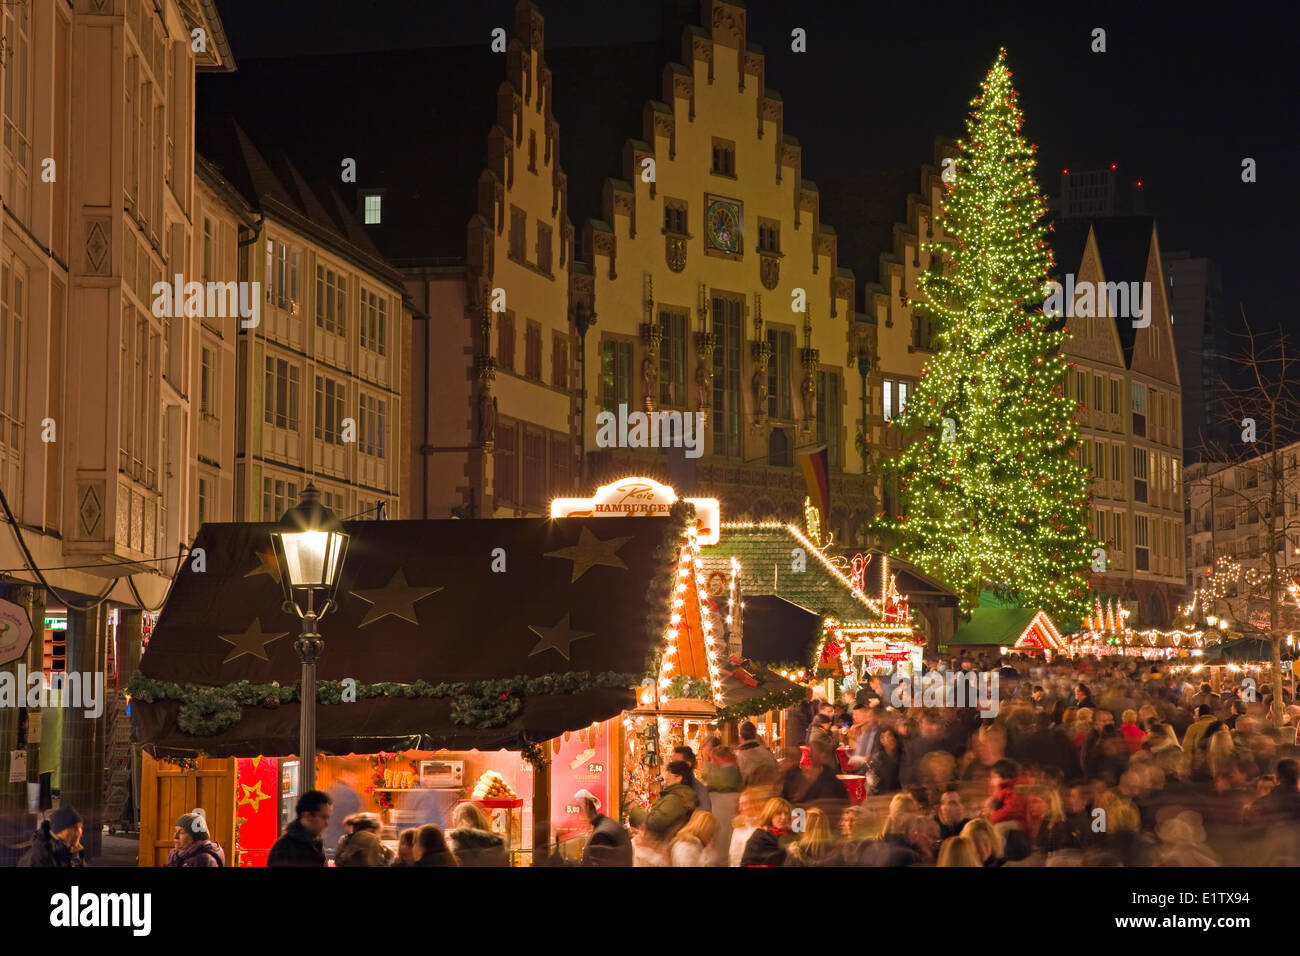 Christkindlmarkt (Christmas Market) stalls set up in front of the Römer, Rathaus (City Hall) in the Römerberg (City Hall Square) Stock Photo